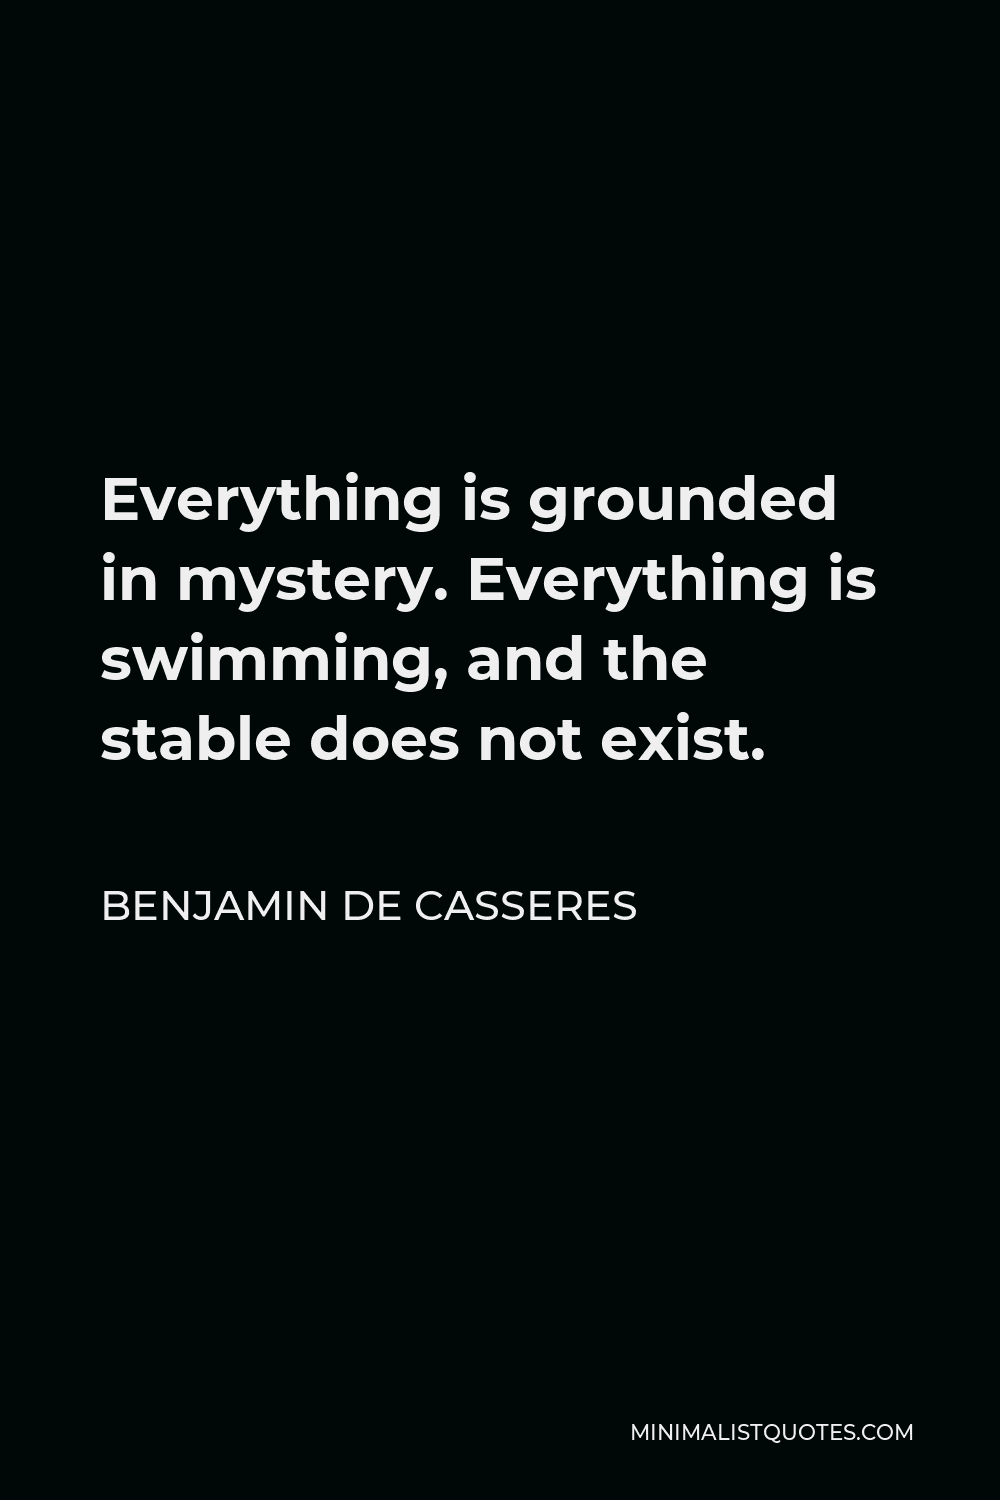 Benjamin De Casseres Quote - Everything is grounded in mystery. Everything is swimming, and the stable does not exist.